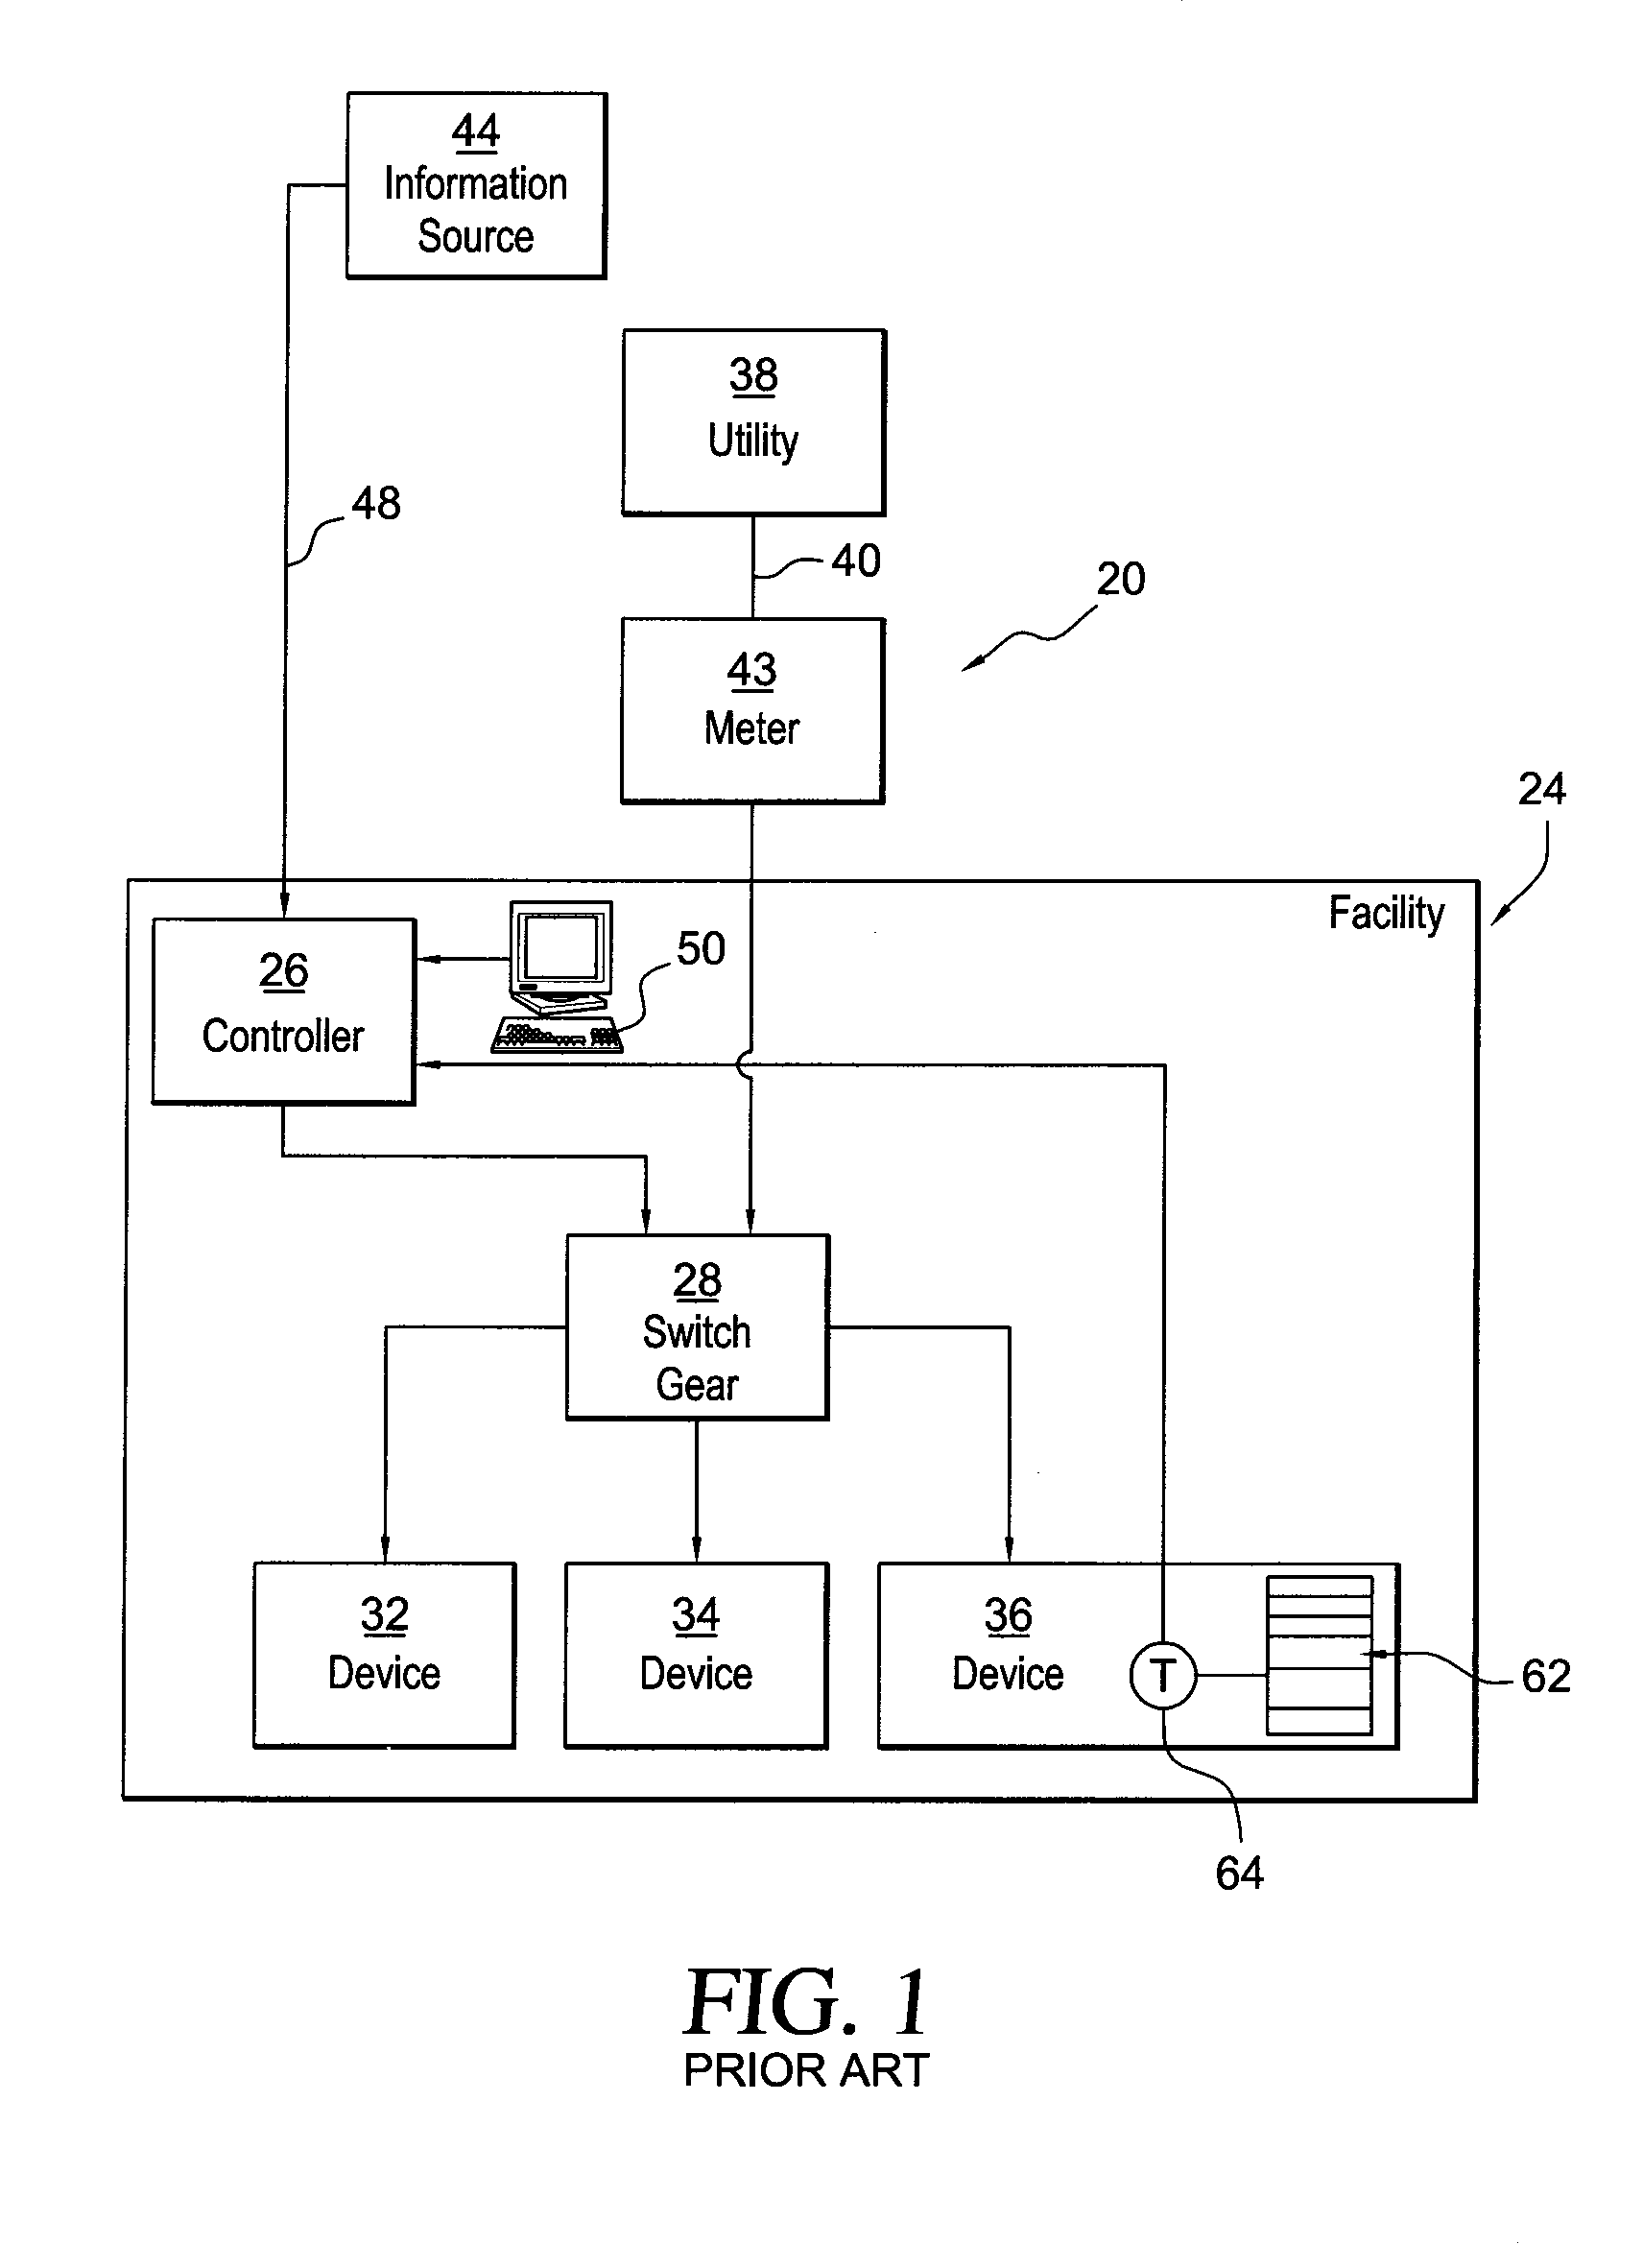 System for monitoring and controlling the consumption of a utility